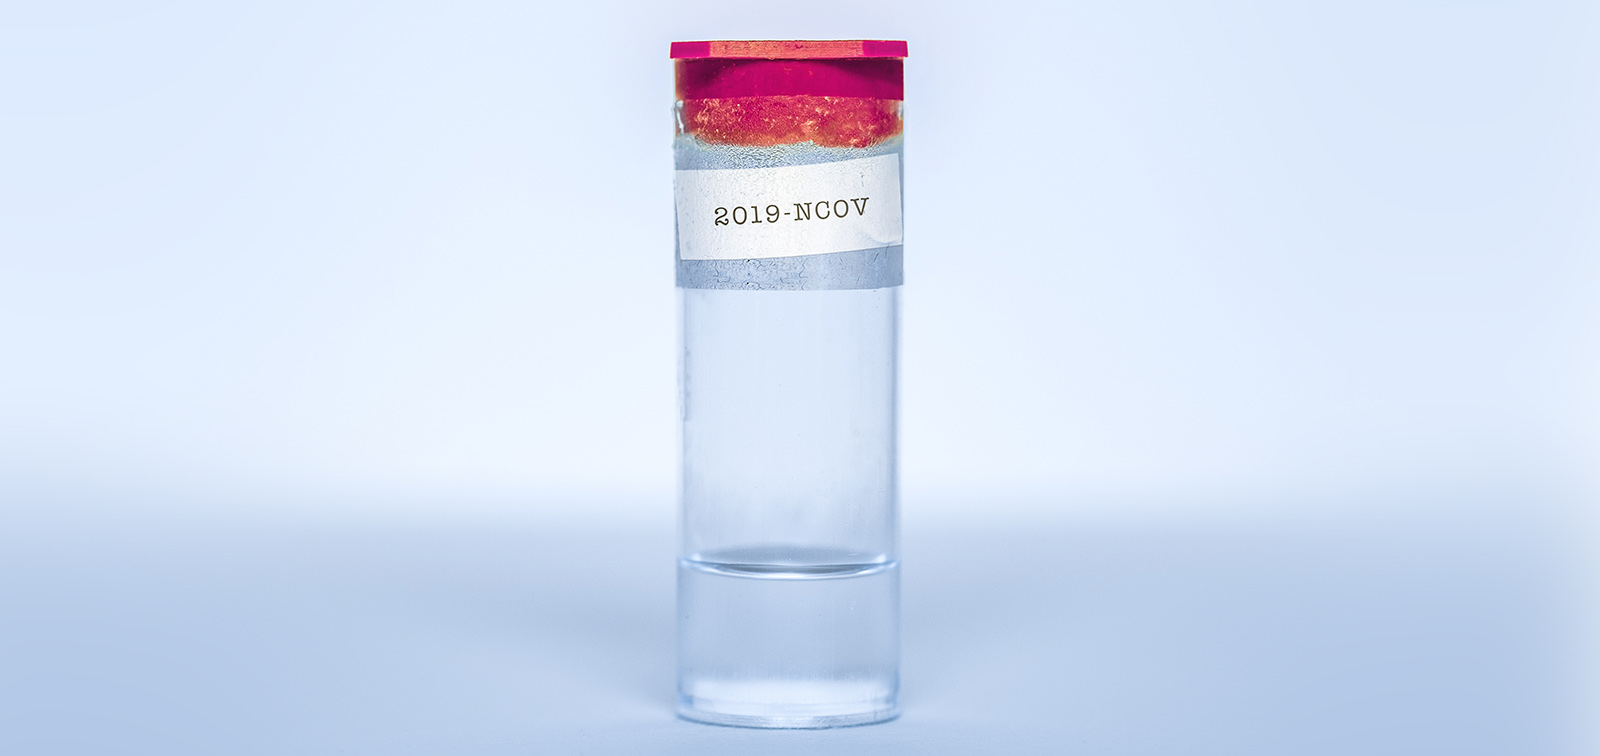 Transparent flask with liquid inside and a 2019-NCOV label taped on it